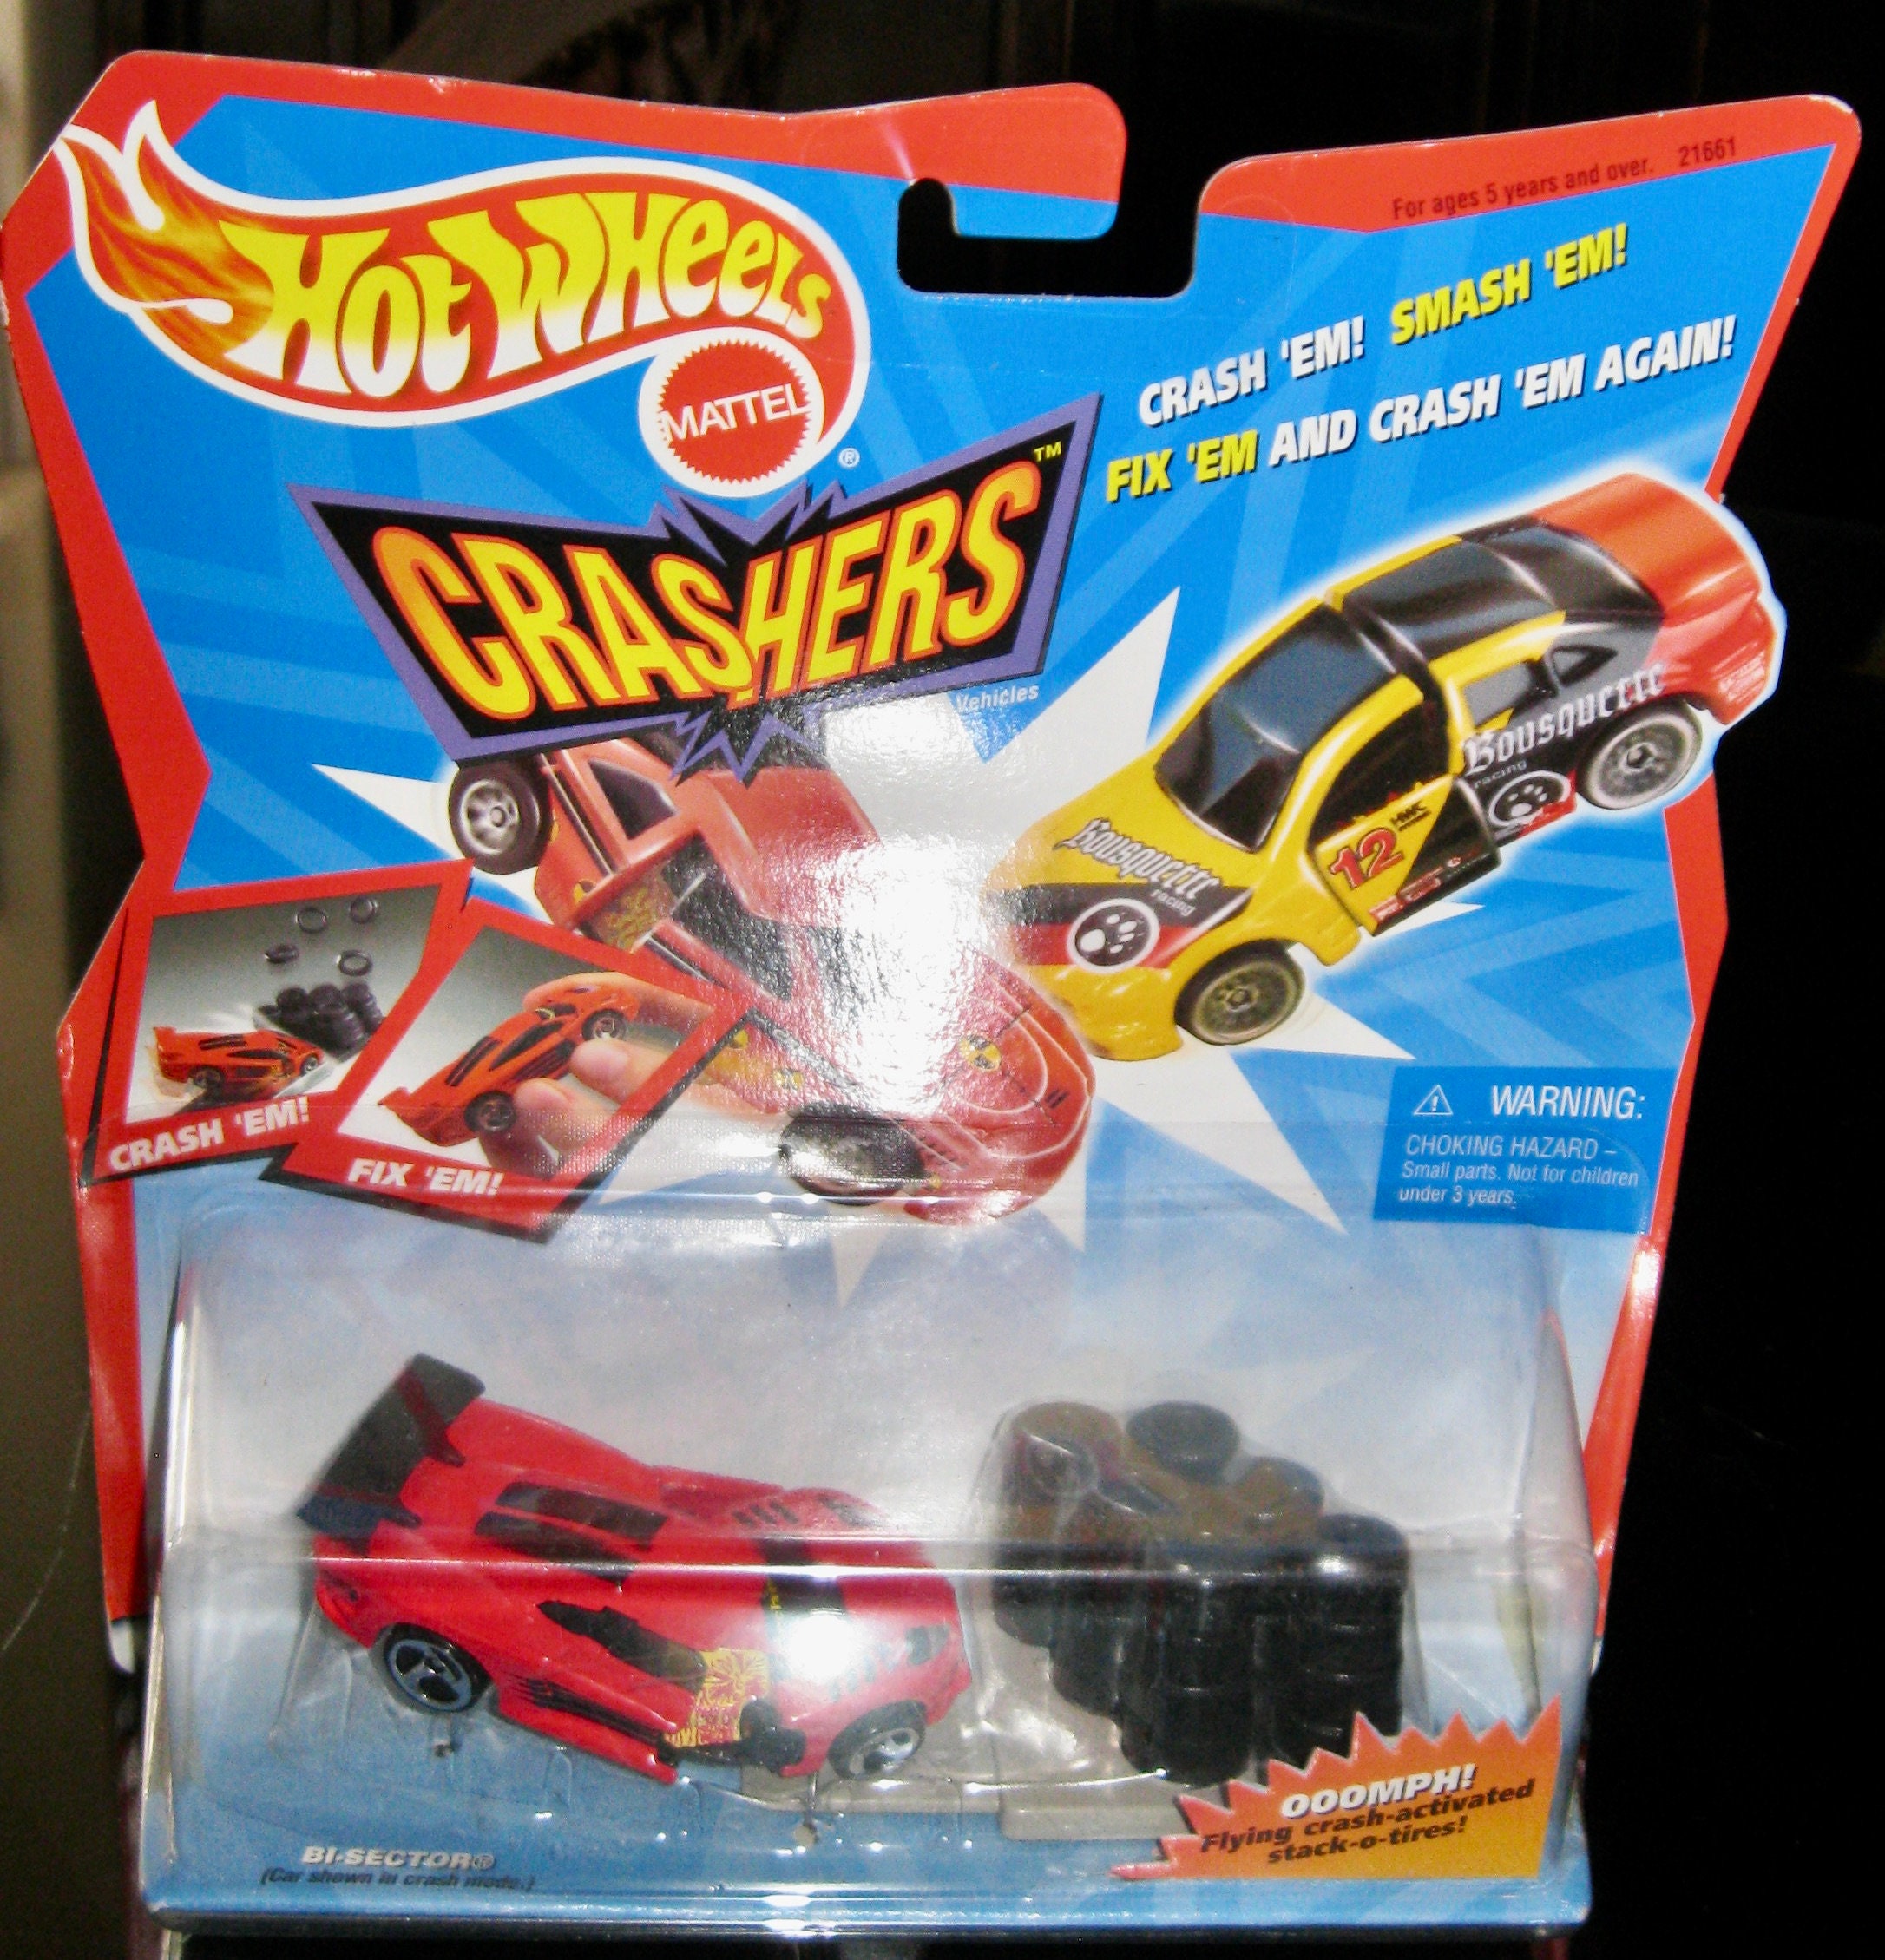 Smash Crashers, Other, Smash Crashers Series Rusty Rigs 1 Truck 3  Collectibles New